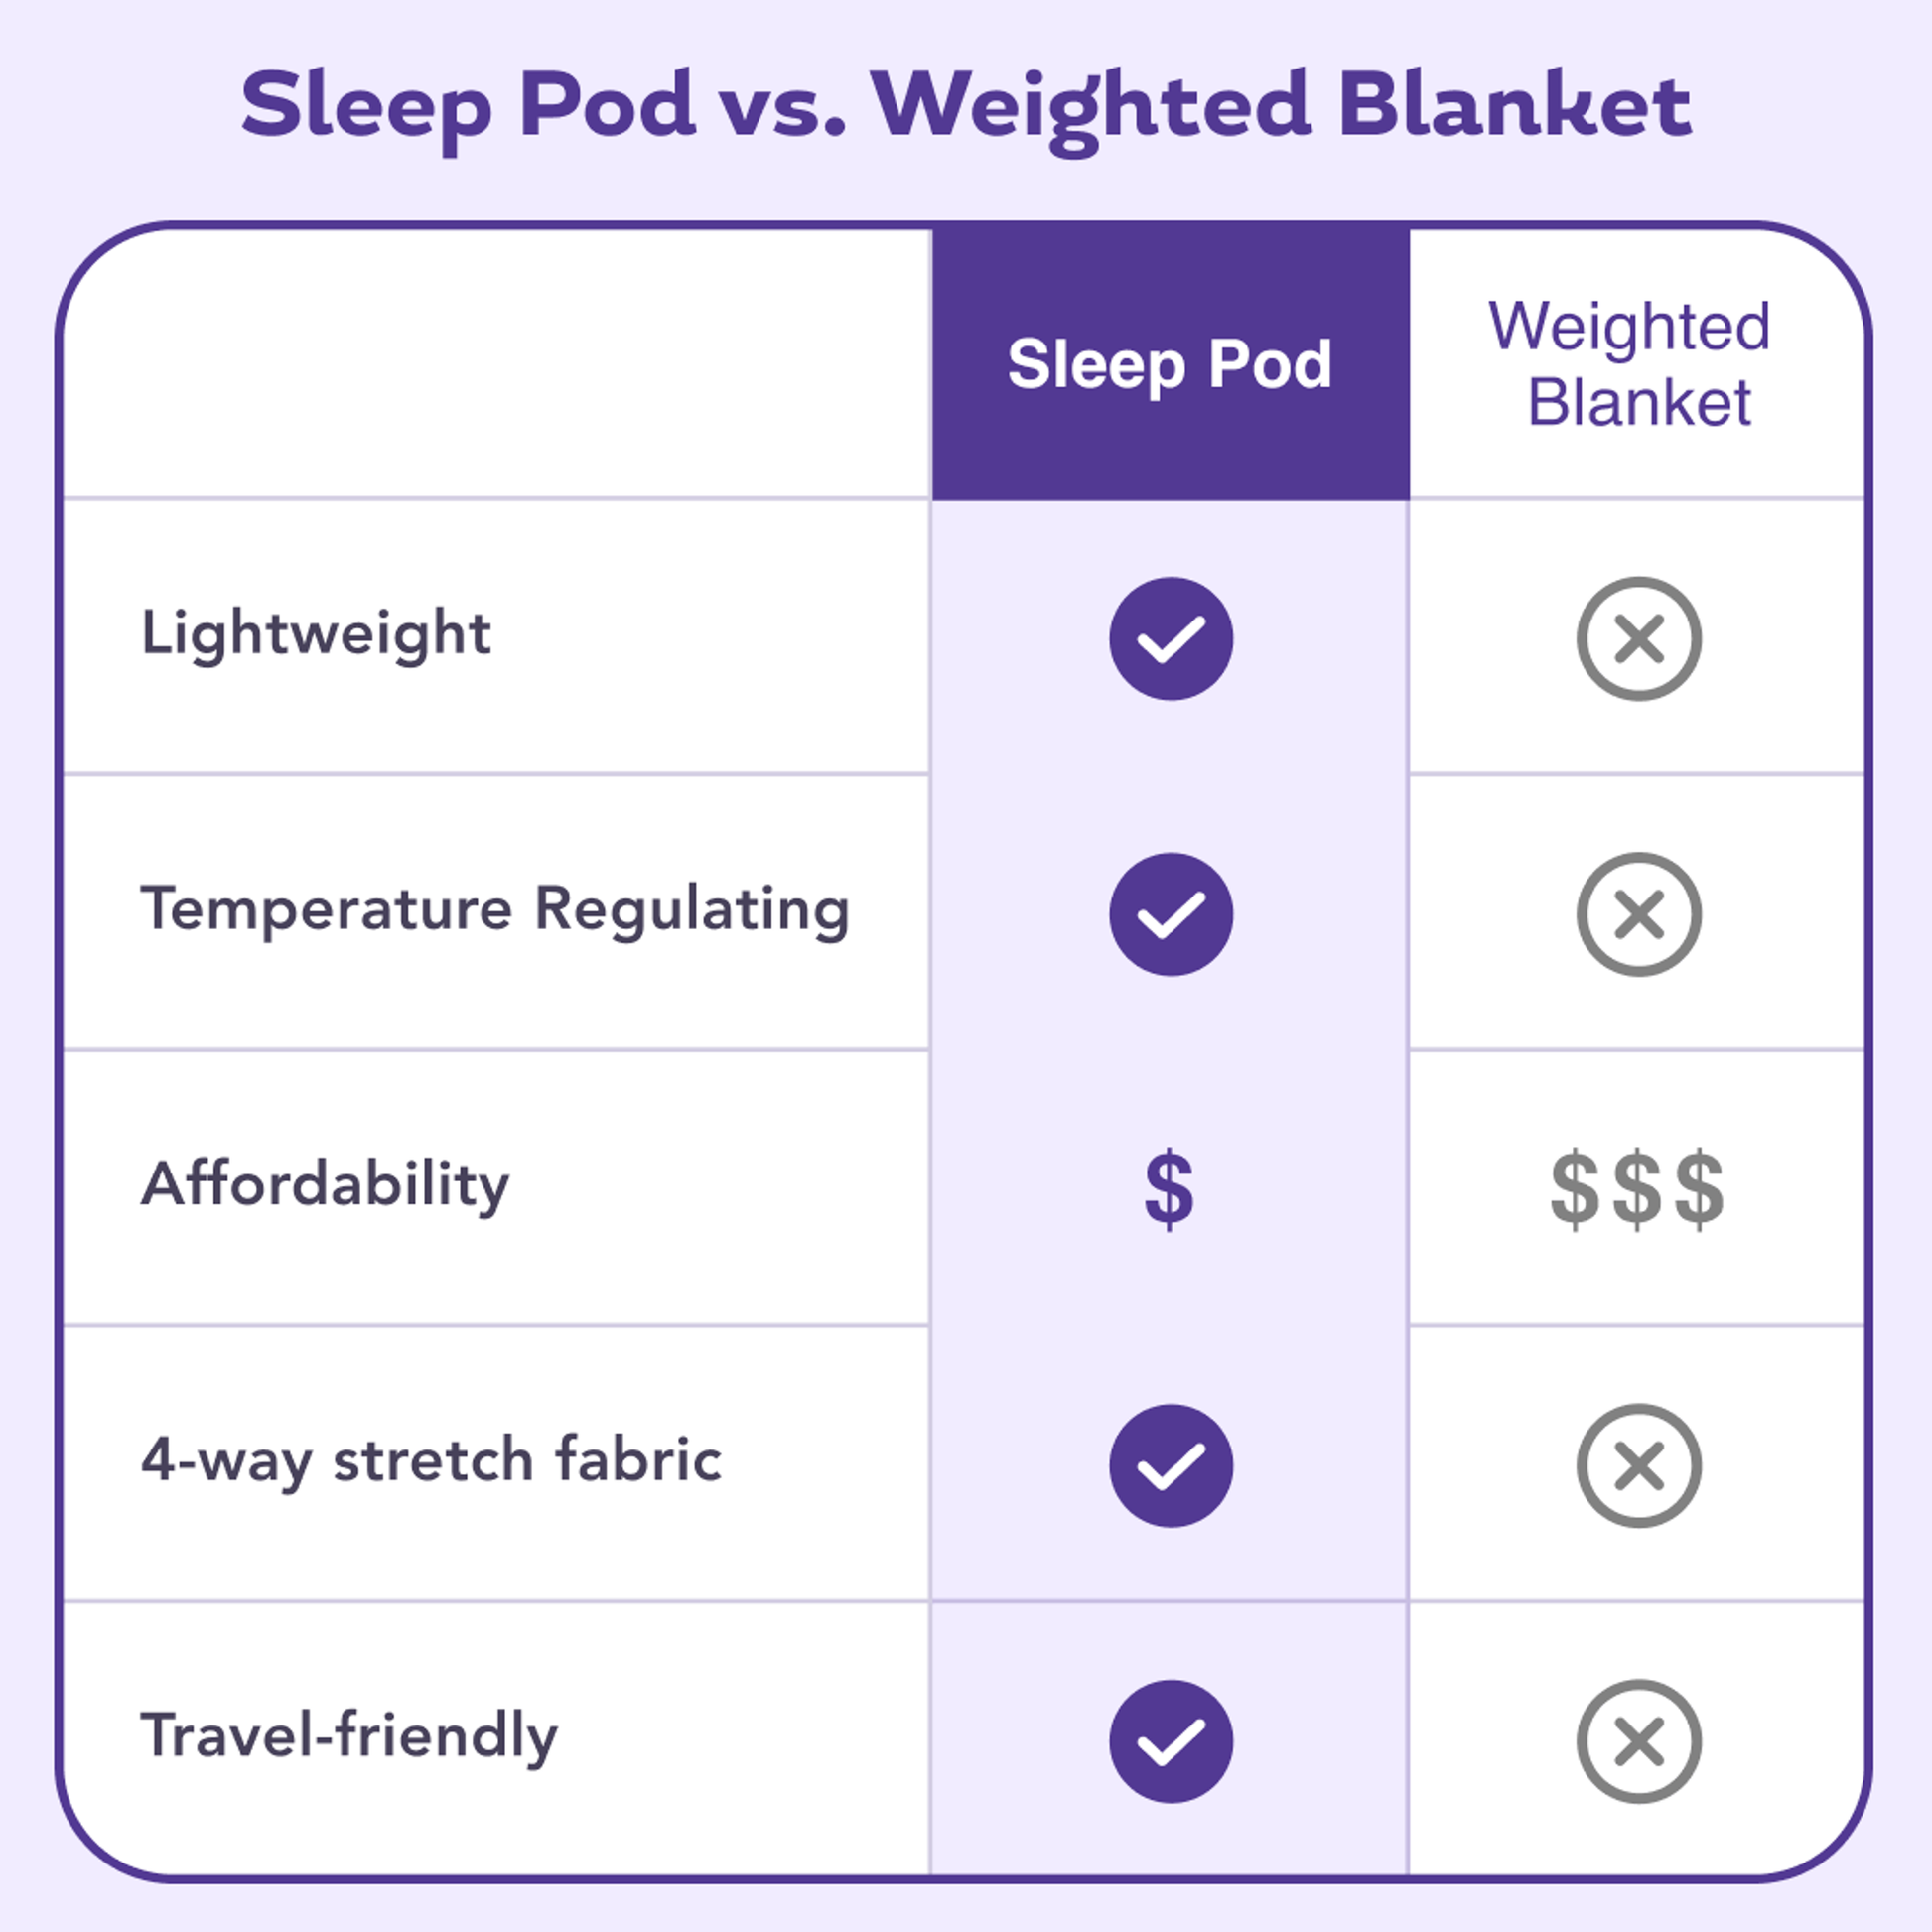 comparison of sleep pod to weighted blankets - sleep pod is lightweight, temperature regulating, affordable, has 4 way stretch material and travel friendly